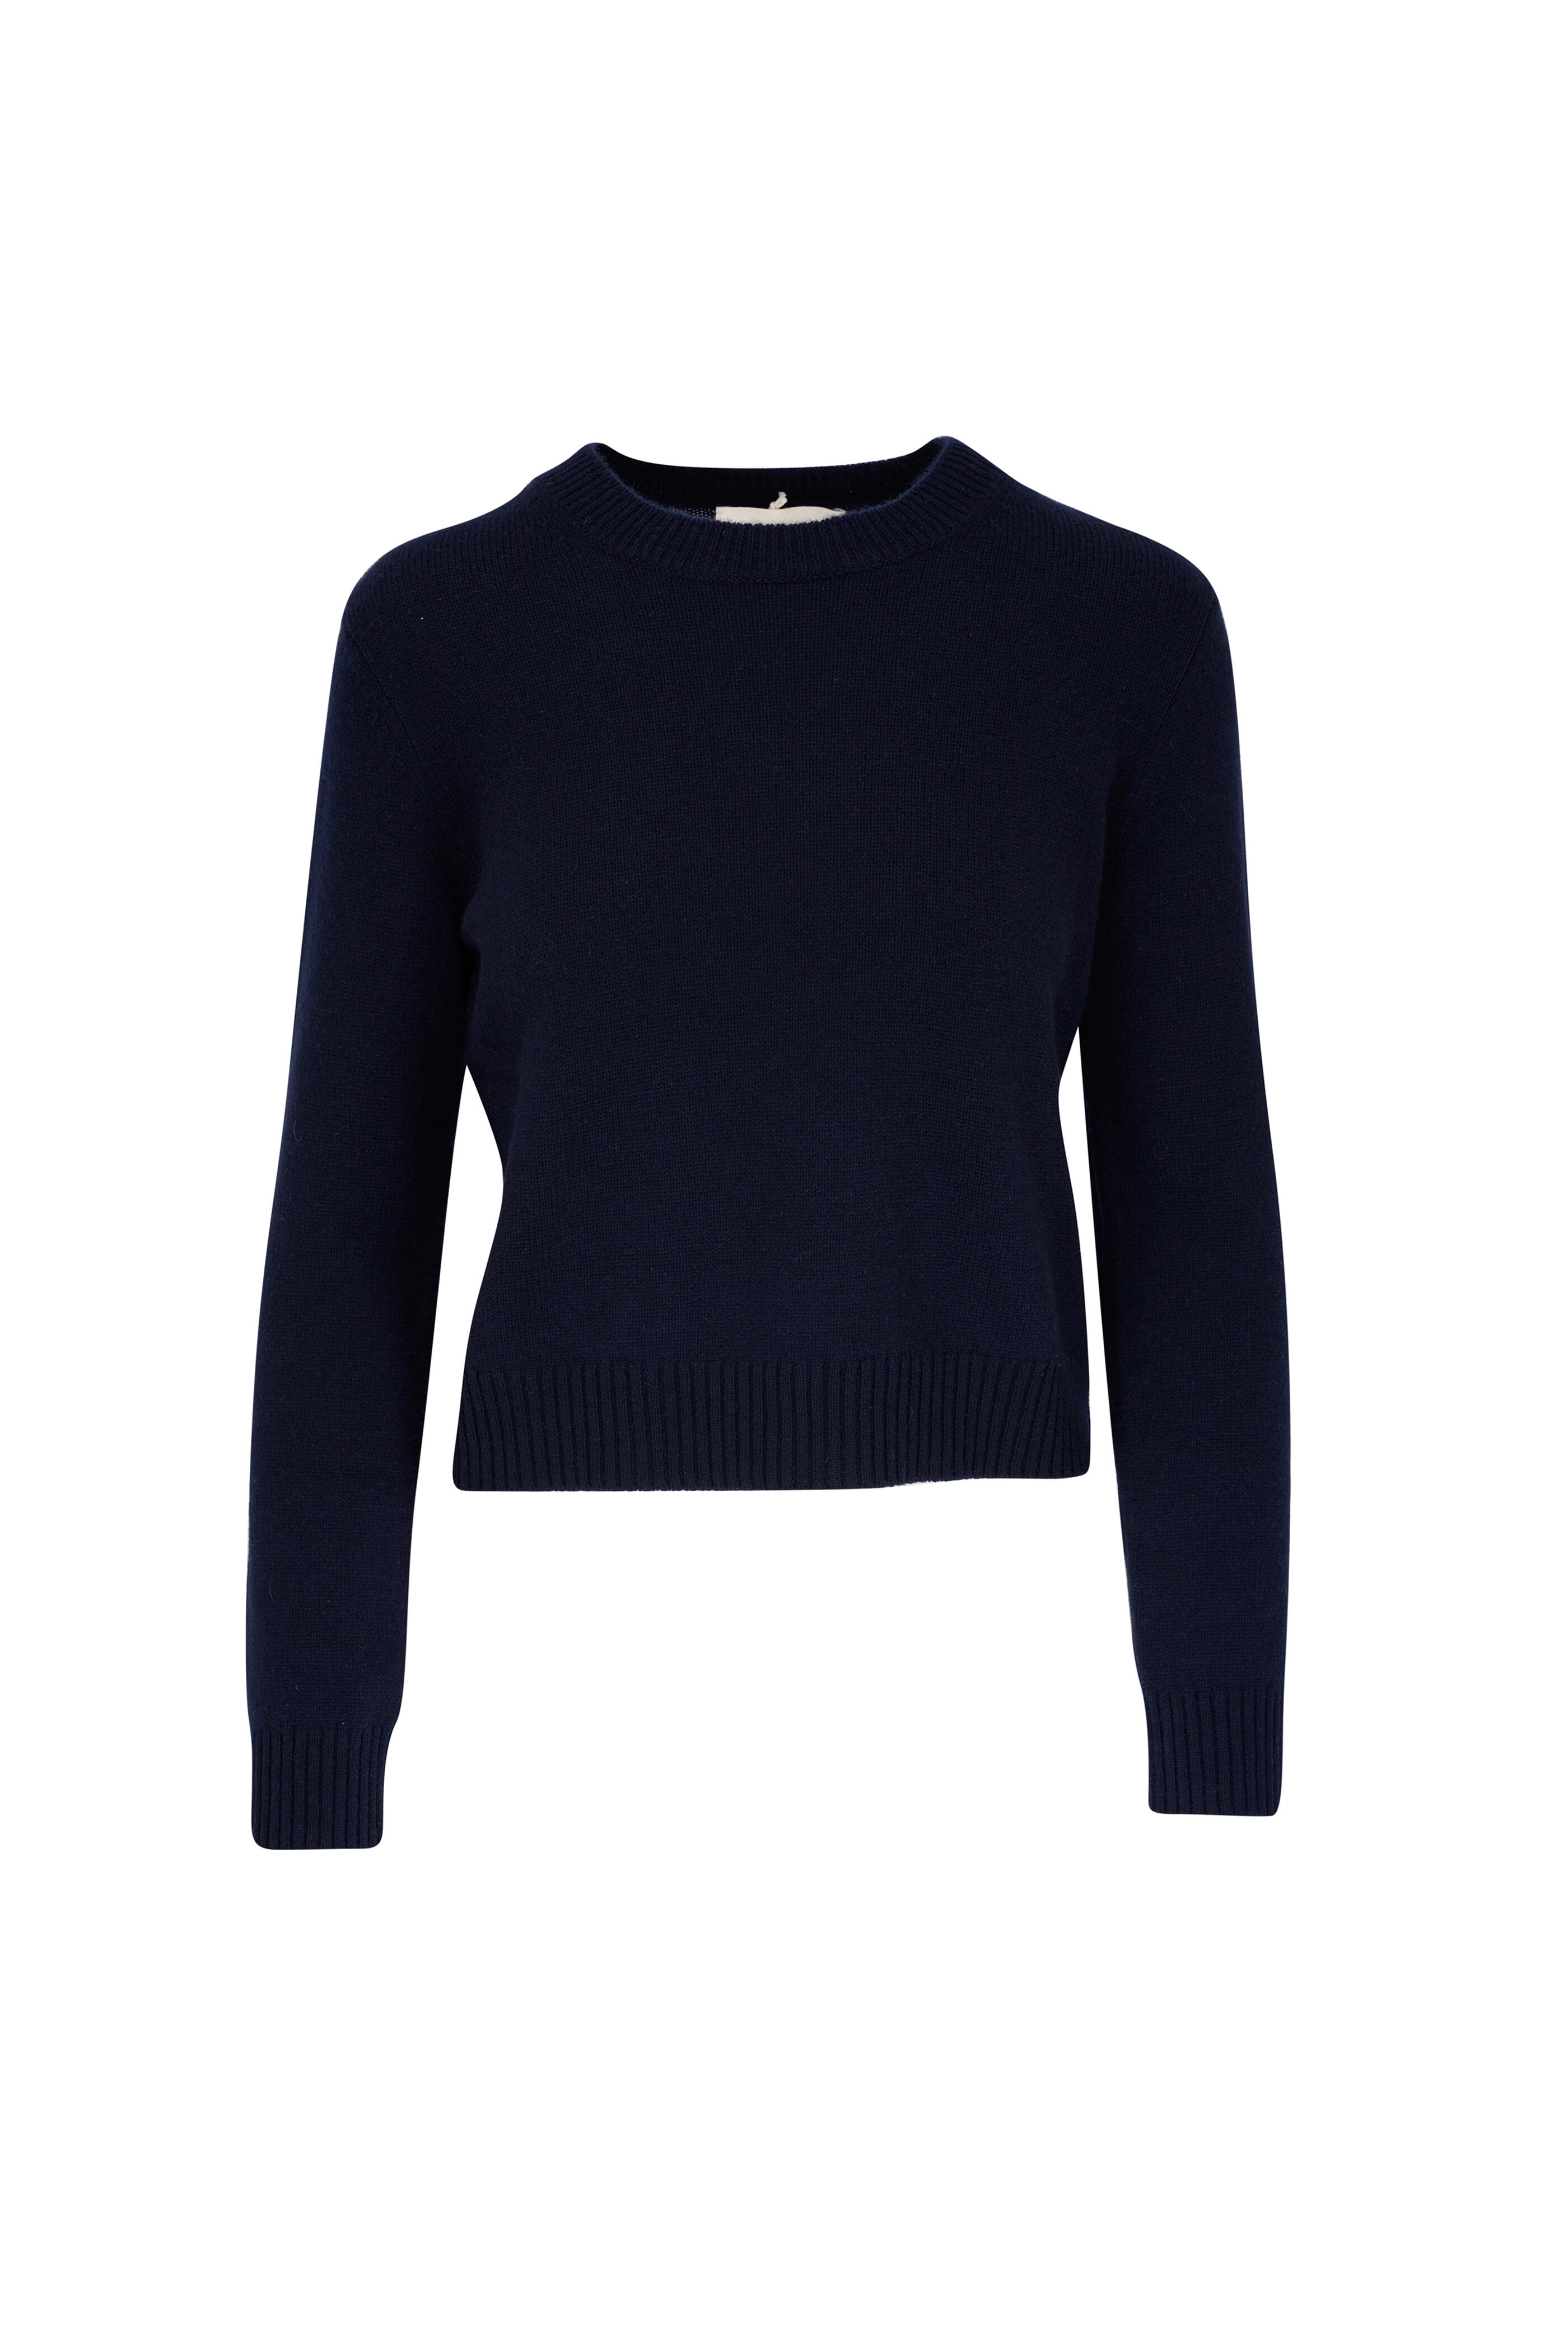 Lisa Yang - Mable Navy Cashmere Sweater | Mitchell Stores